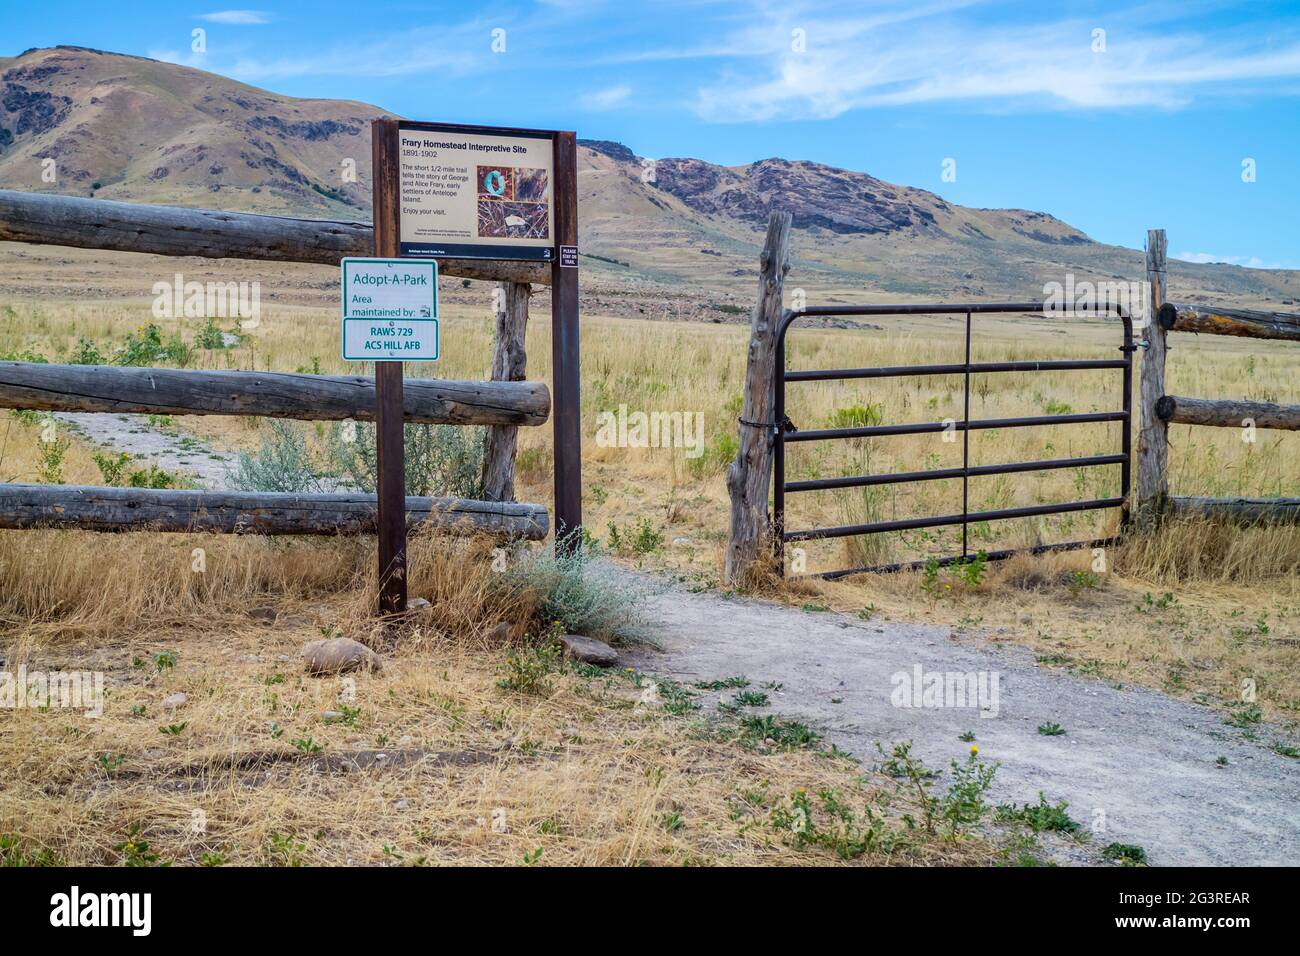 A description board of the historic settlement of a family in Antelope Island SP, Utah Stock Photo